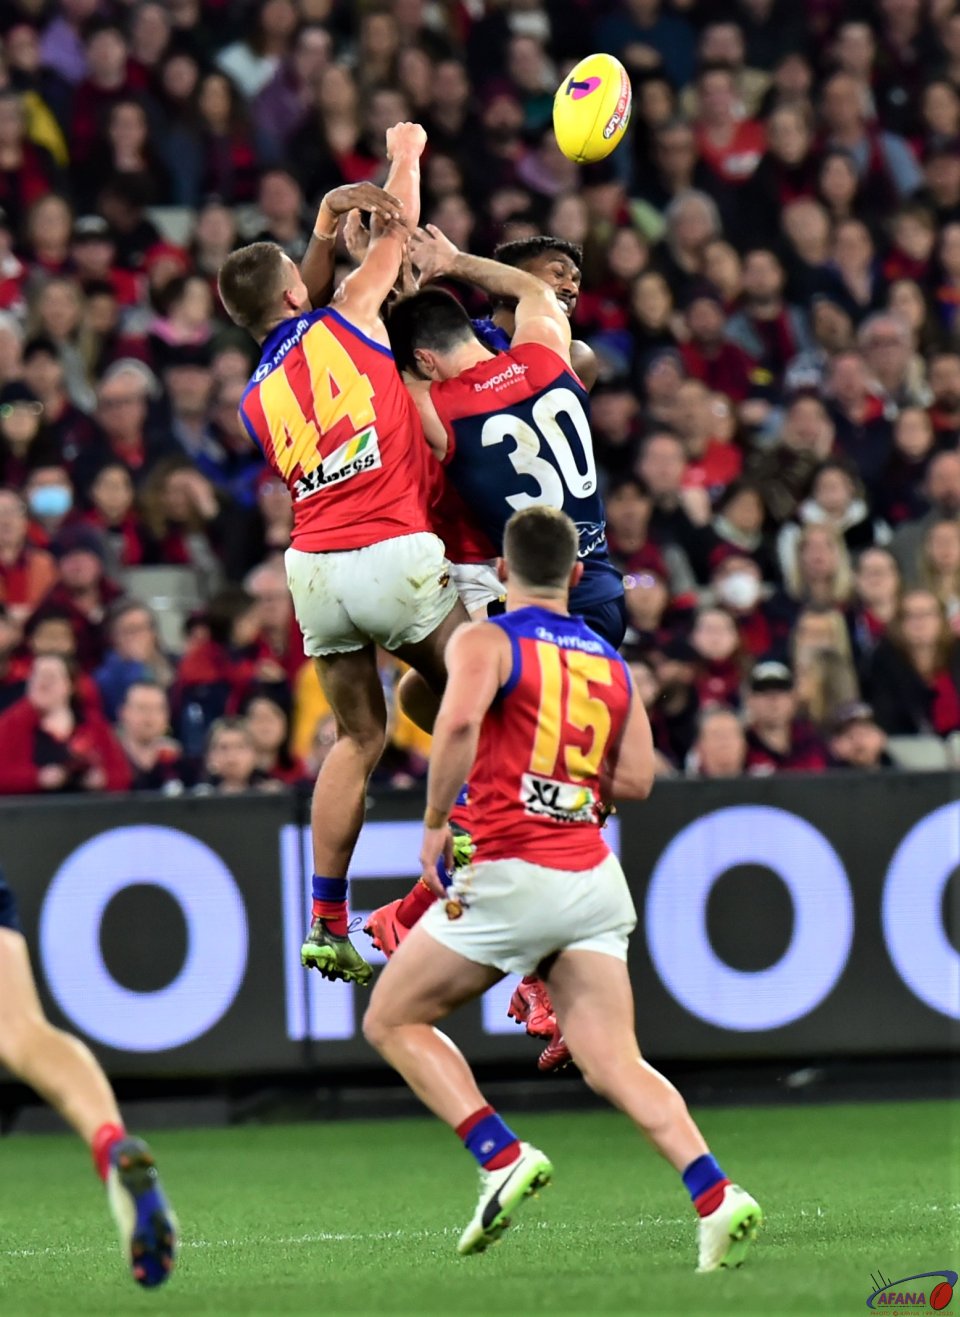 lions defend the Dees attack